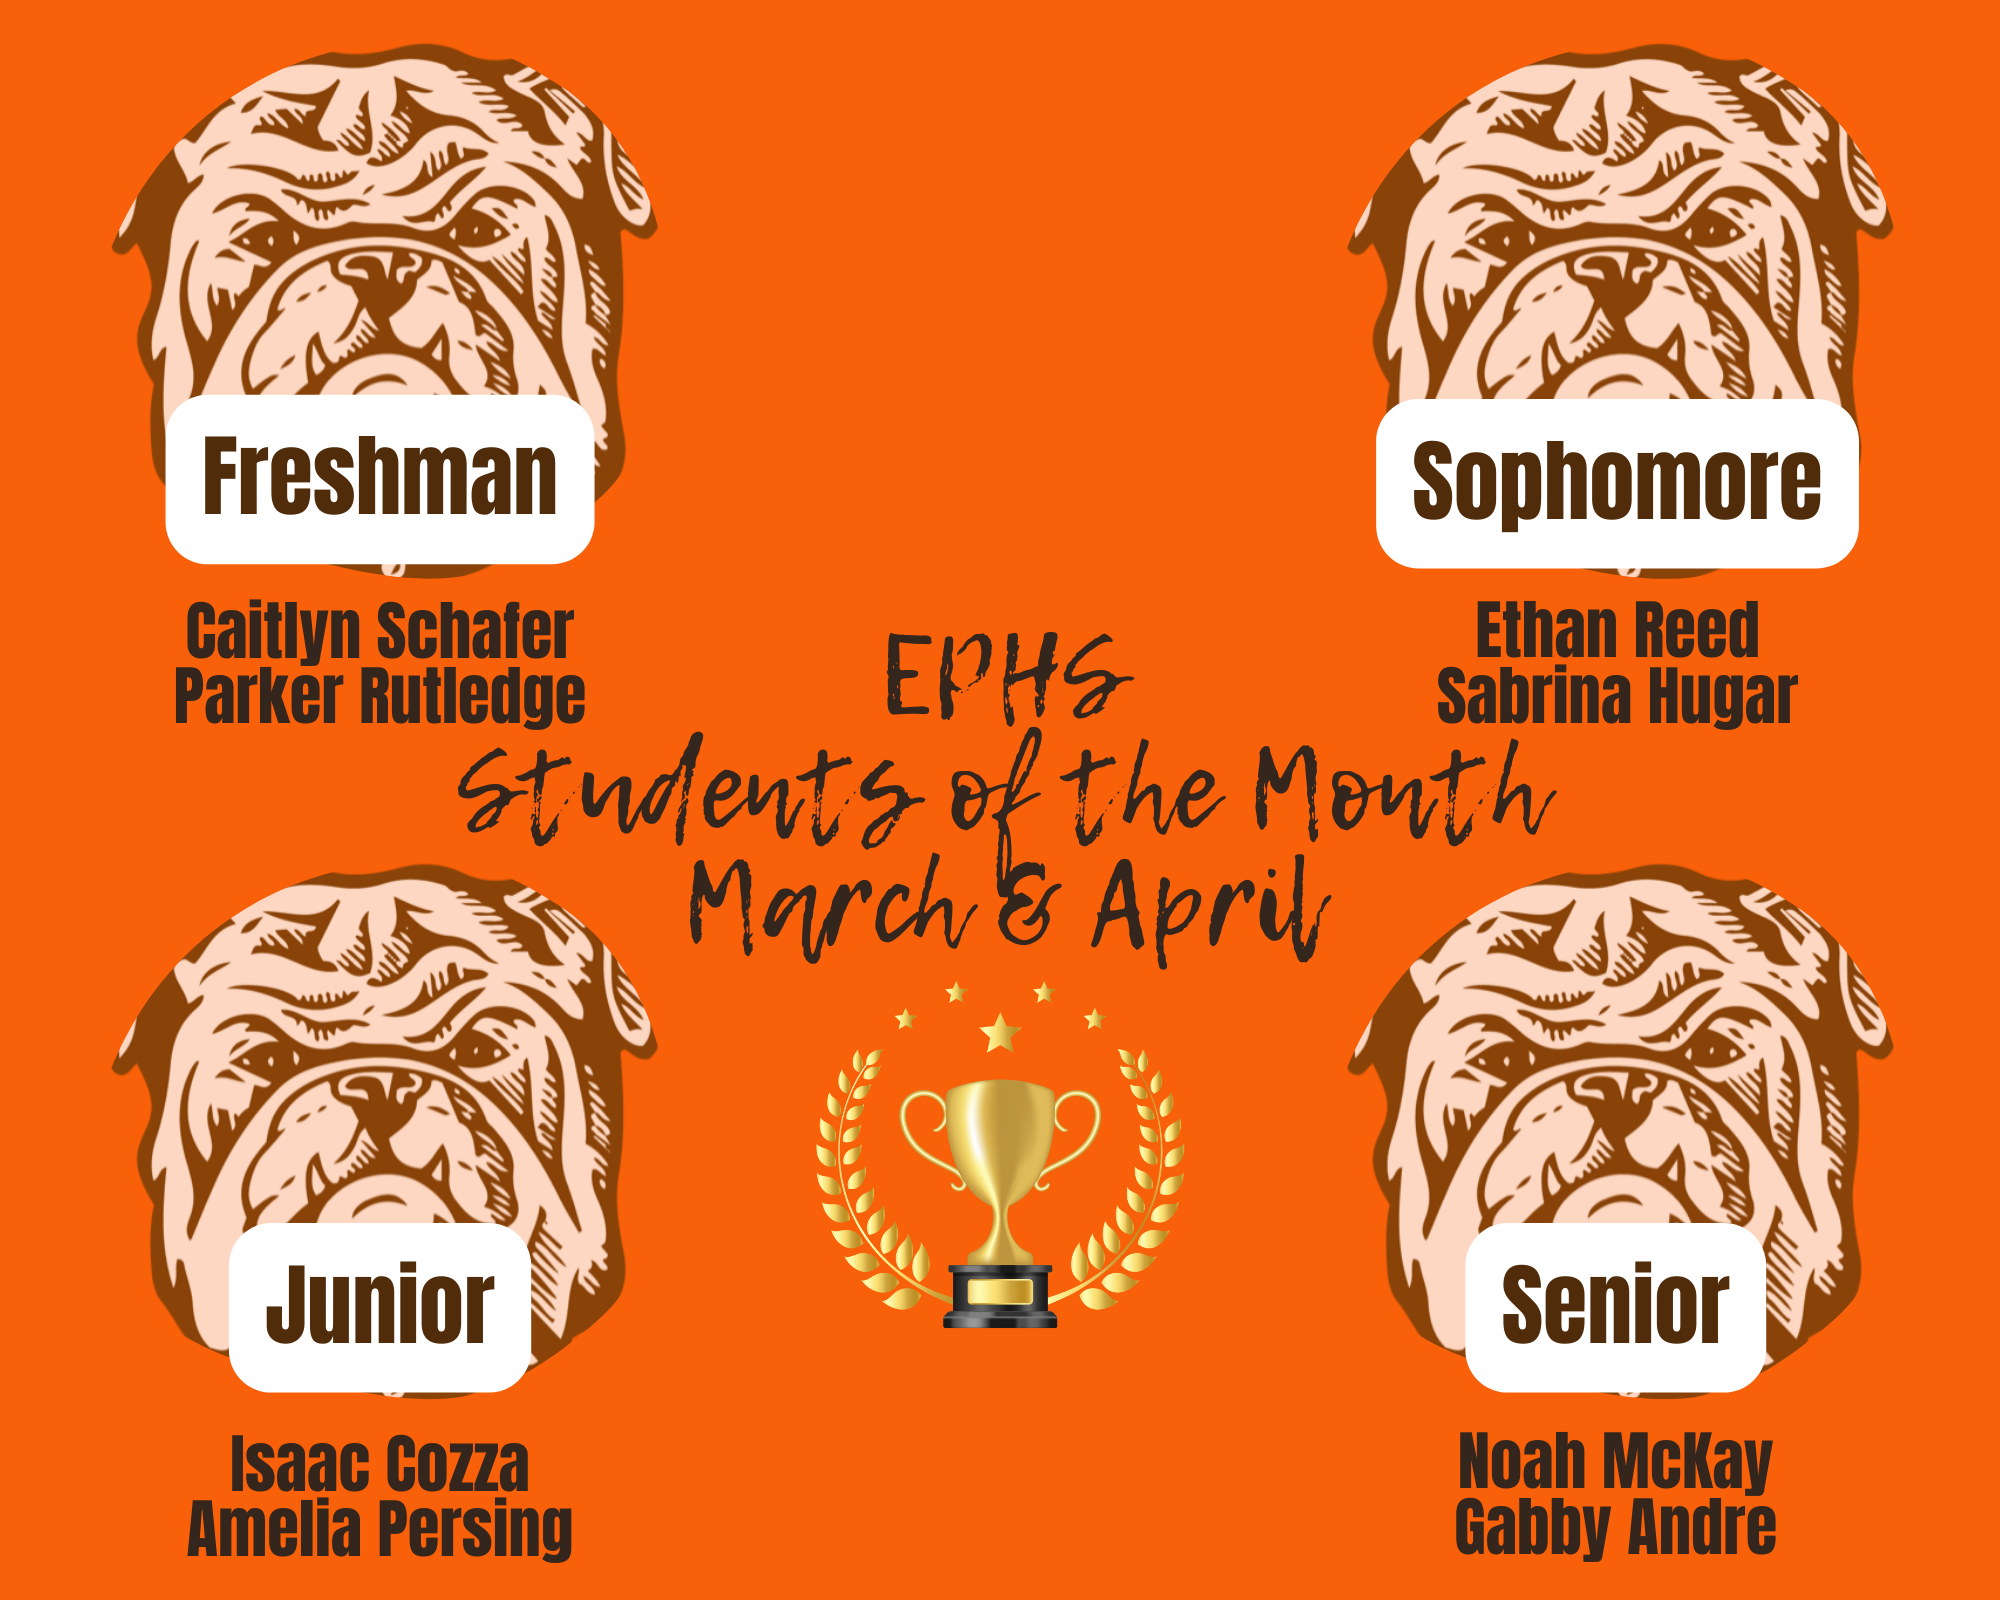 ephs students of the month for march and april